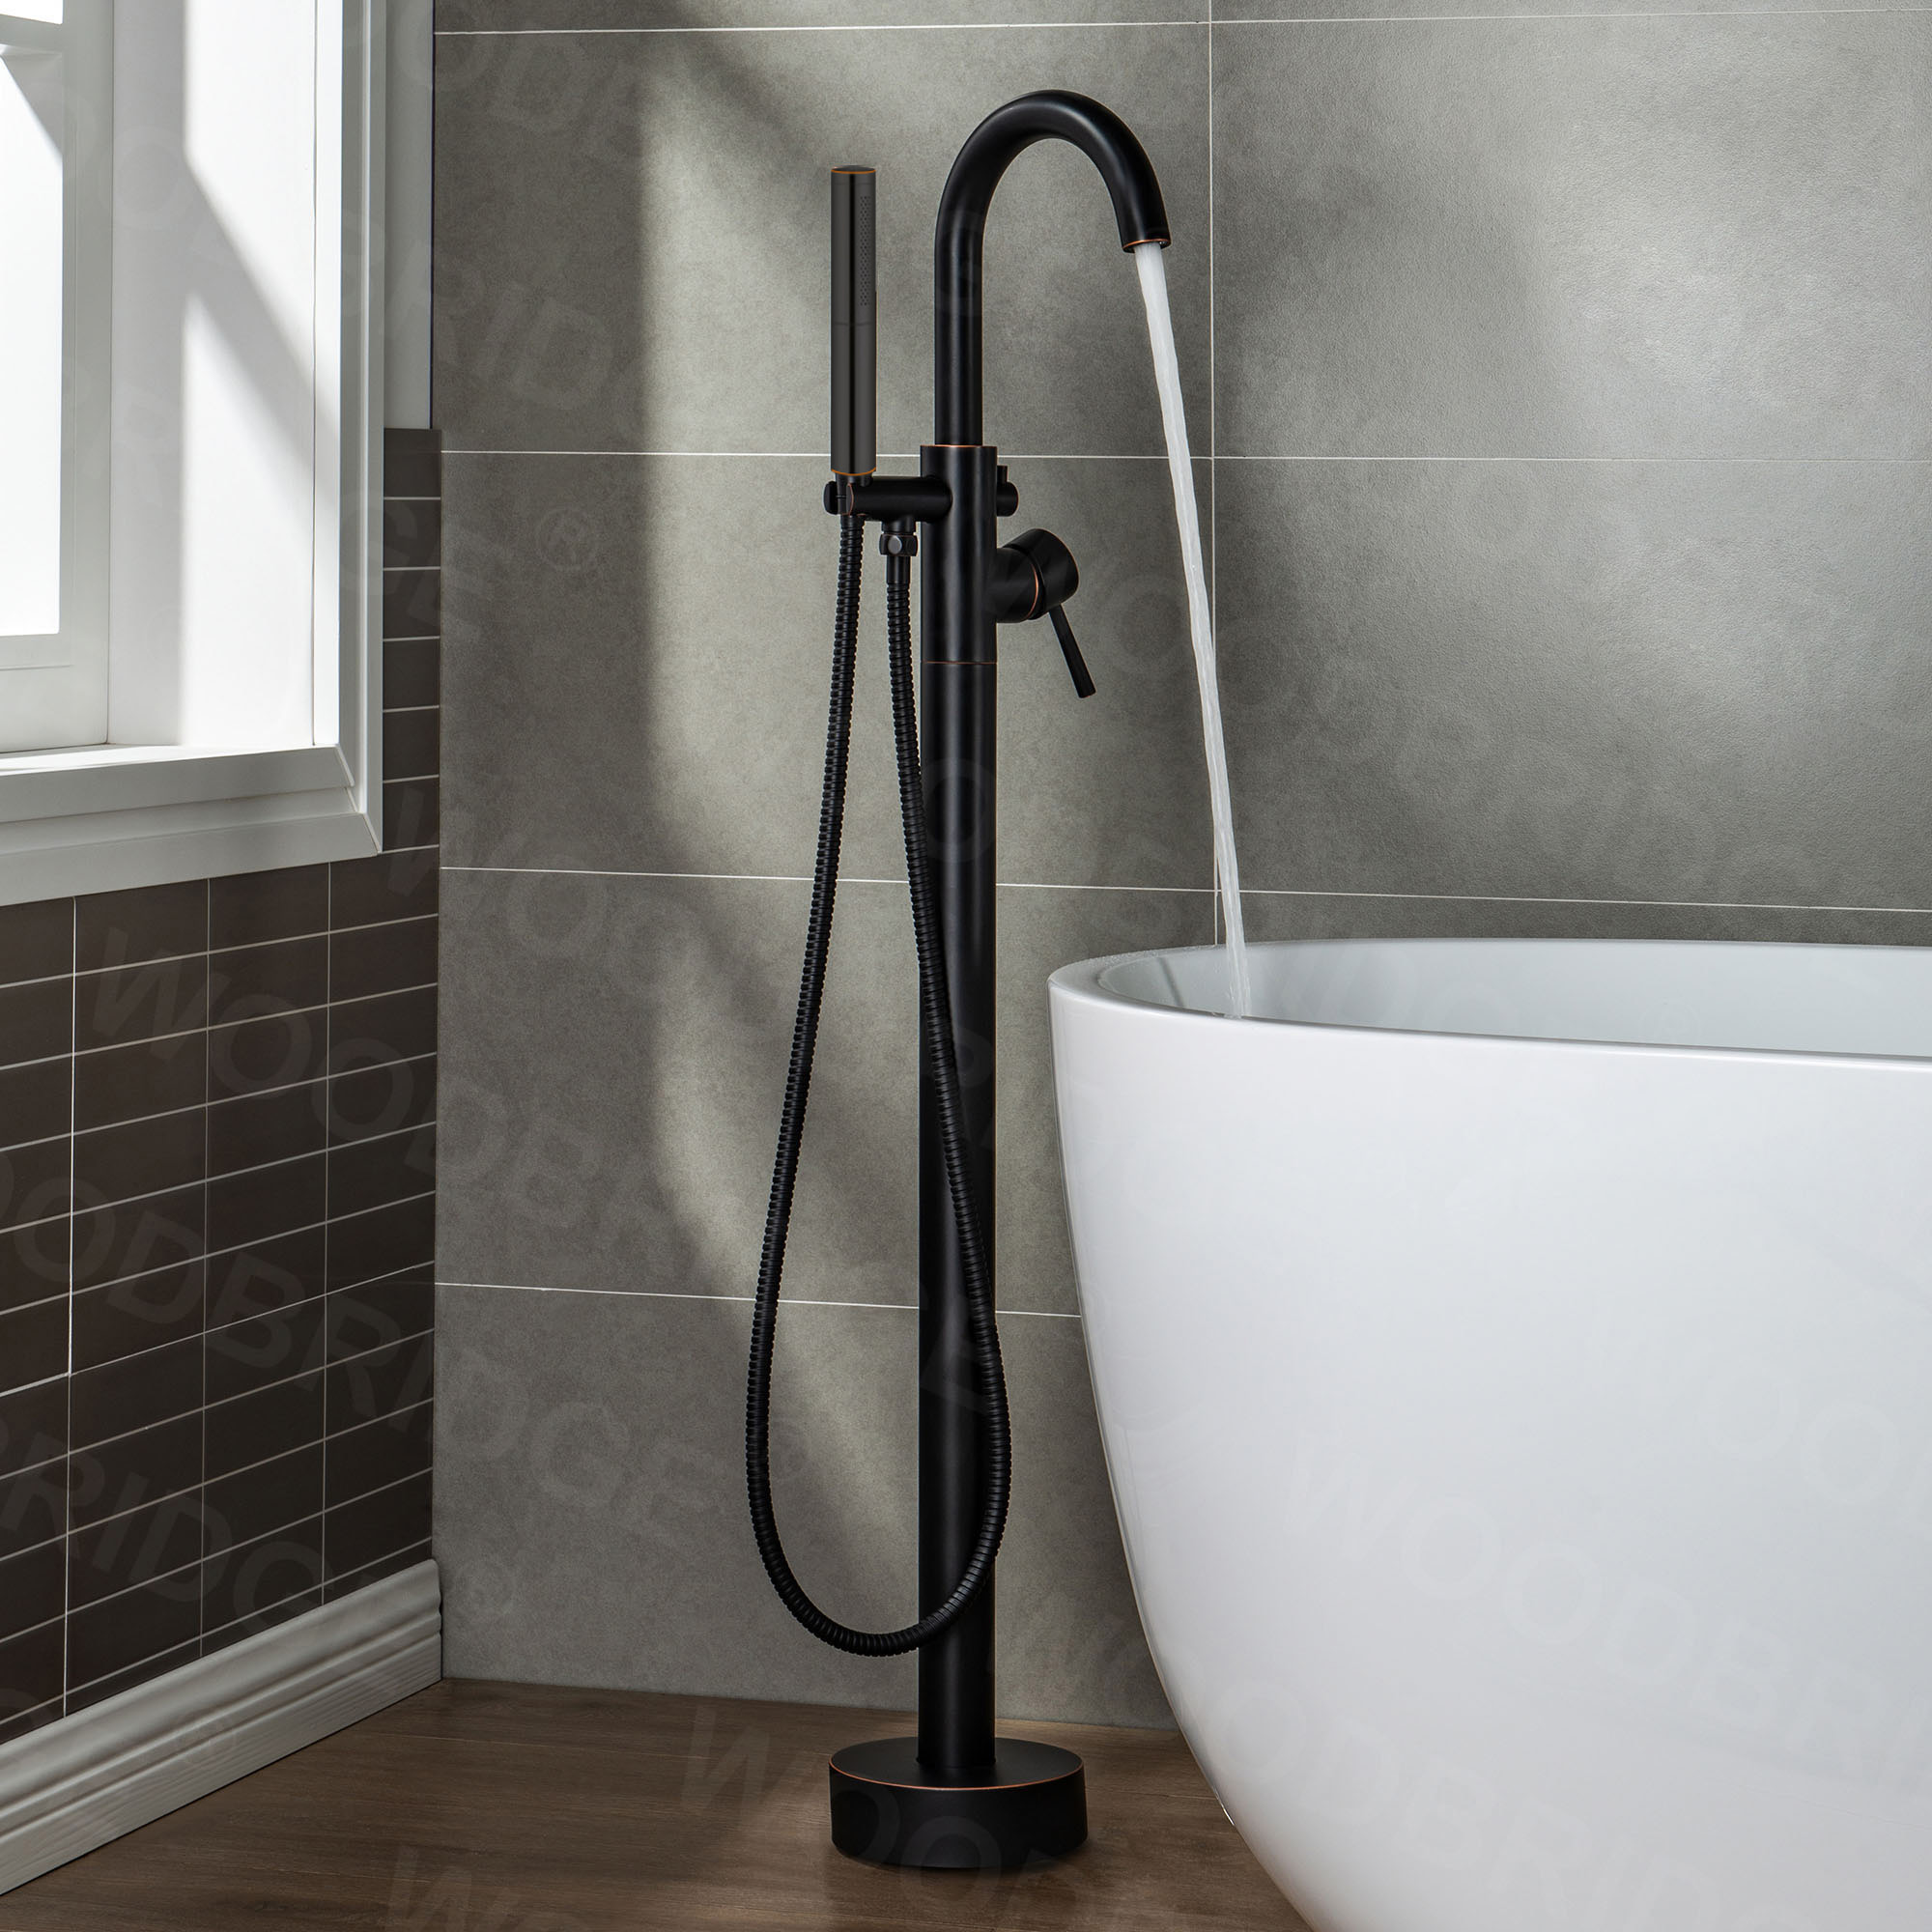  WOODBRIDGE F0010ORBDR Contemporary Single Handle Floor Mount Freestanding Tub Filler Faucet with Hand shower in Oil Rubbed Bronze Finish._14267